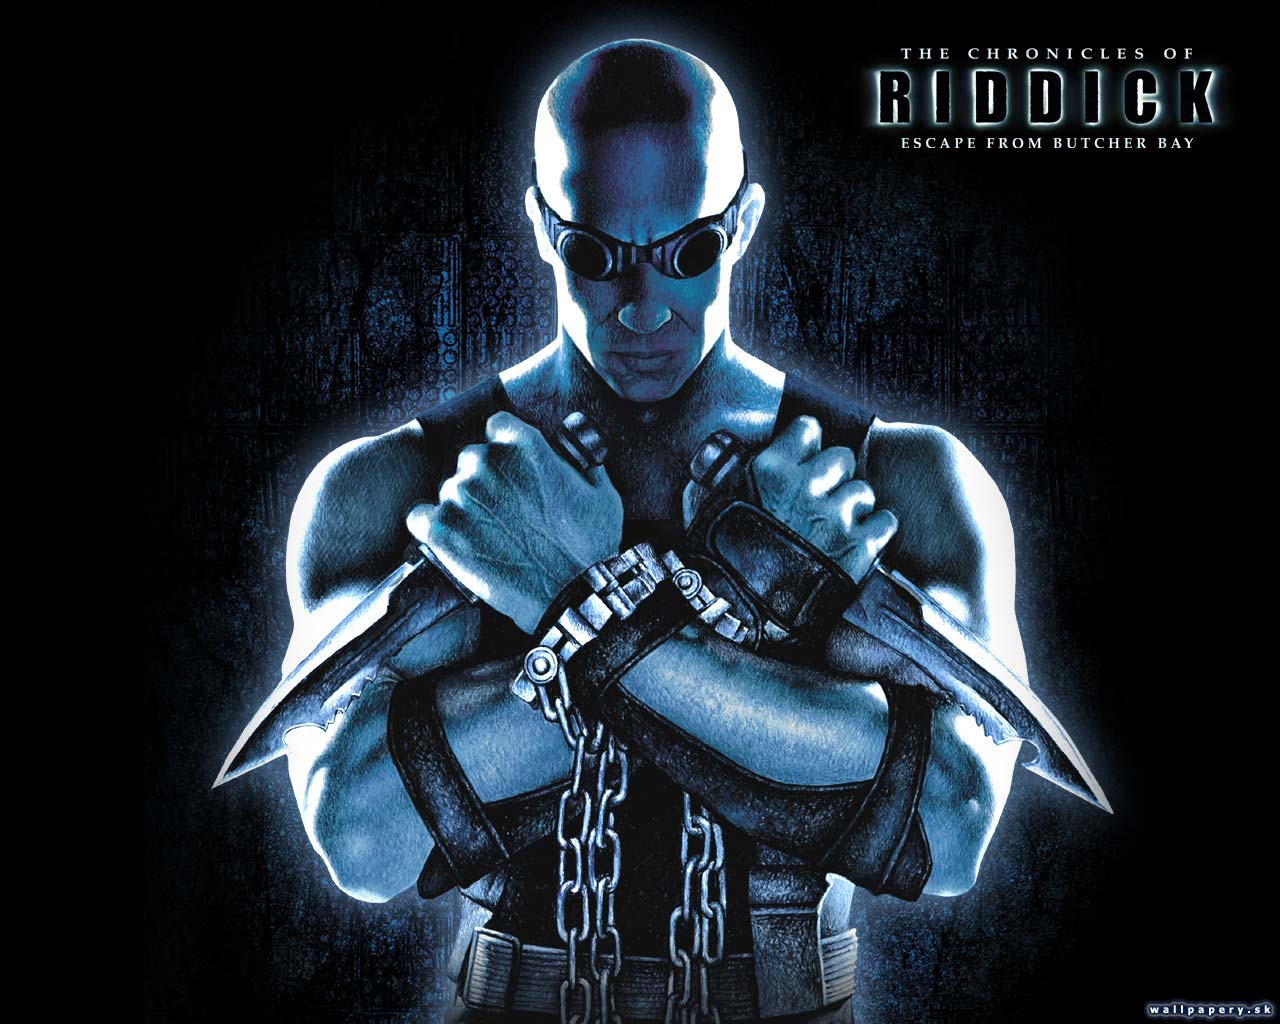 The Chronicles of Riddick: Escape From Butcher Bay - wallpaper 4